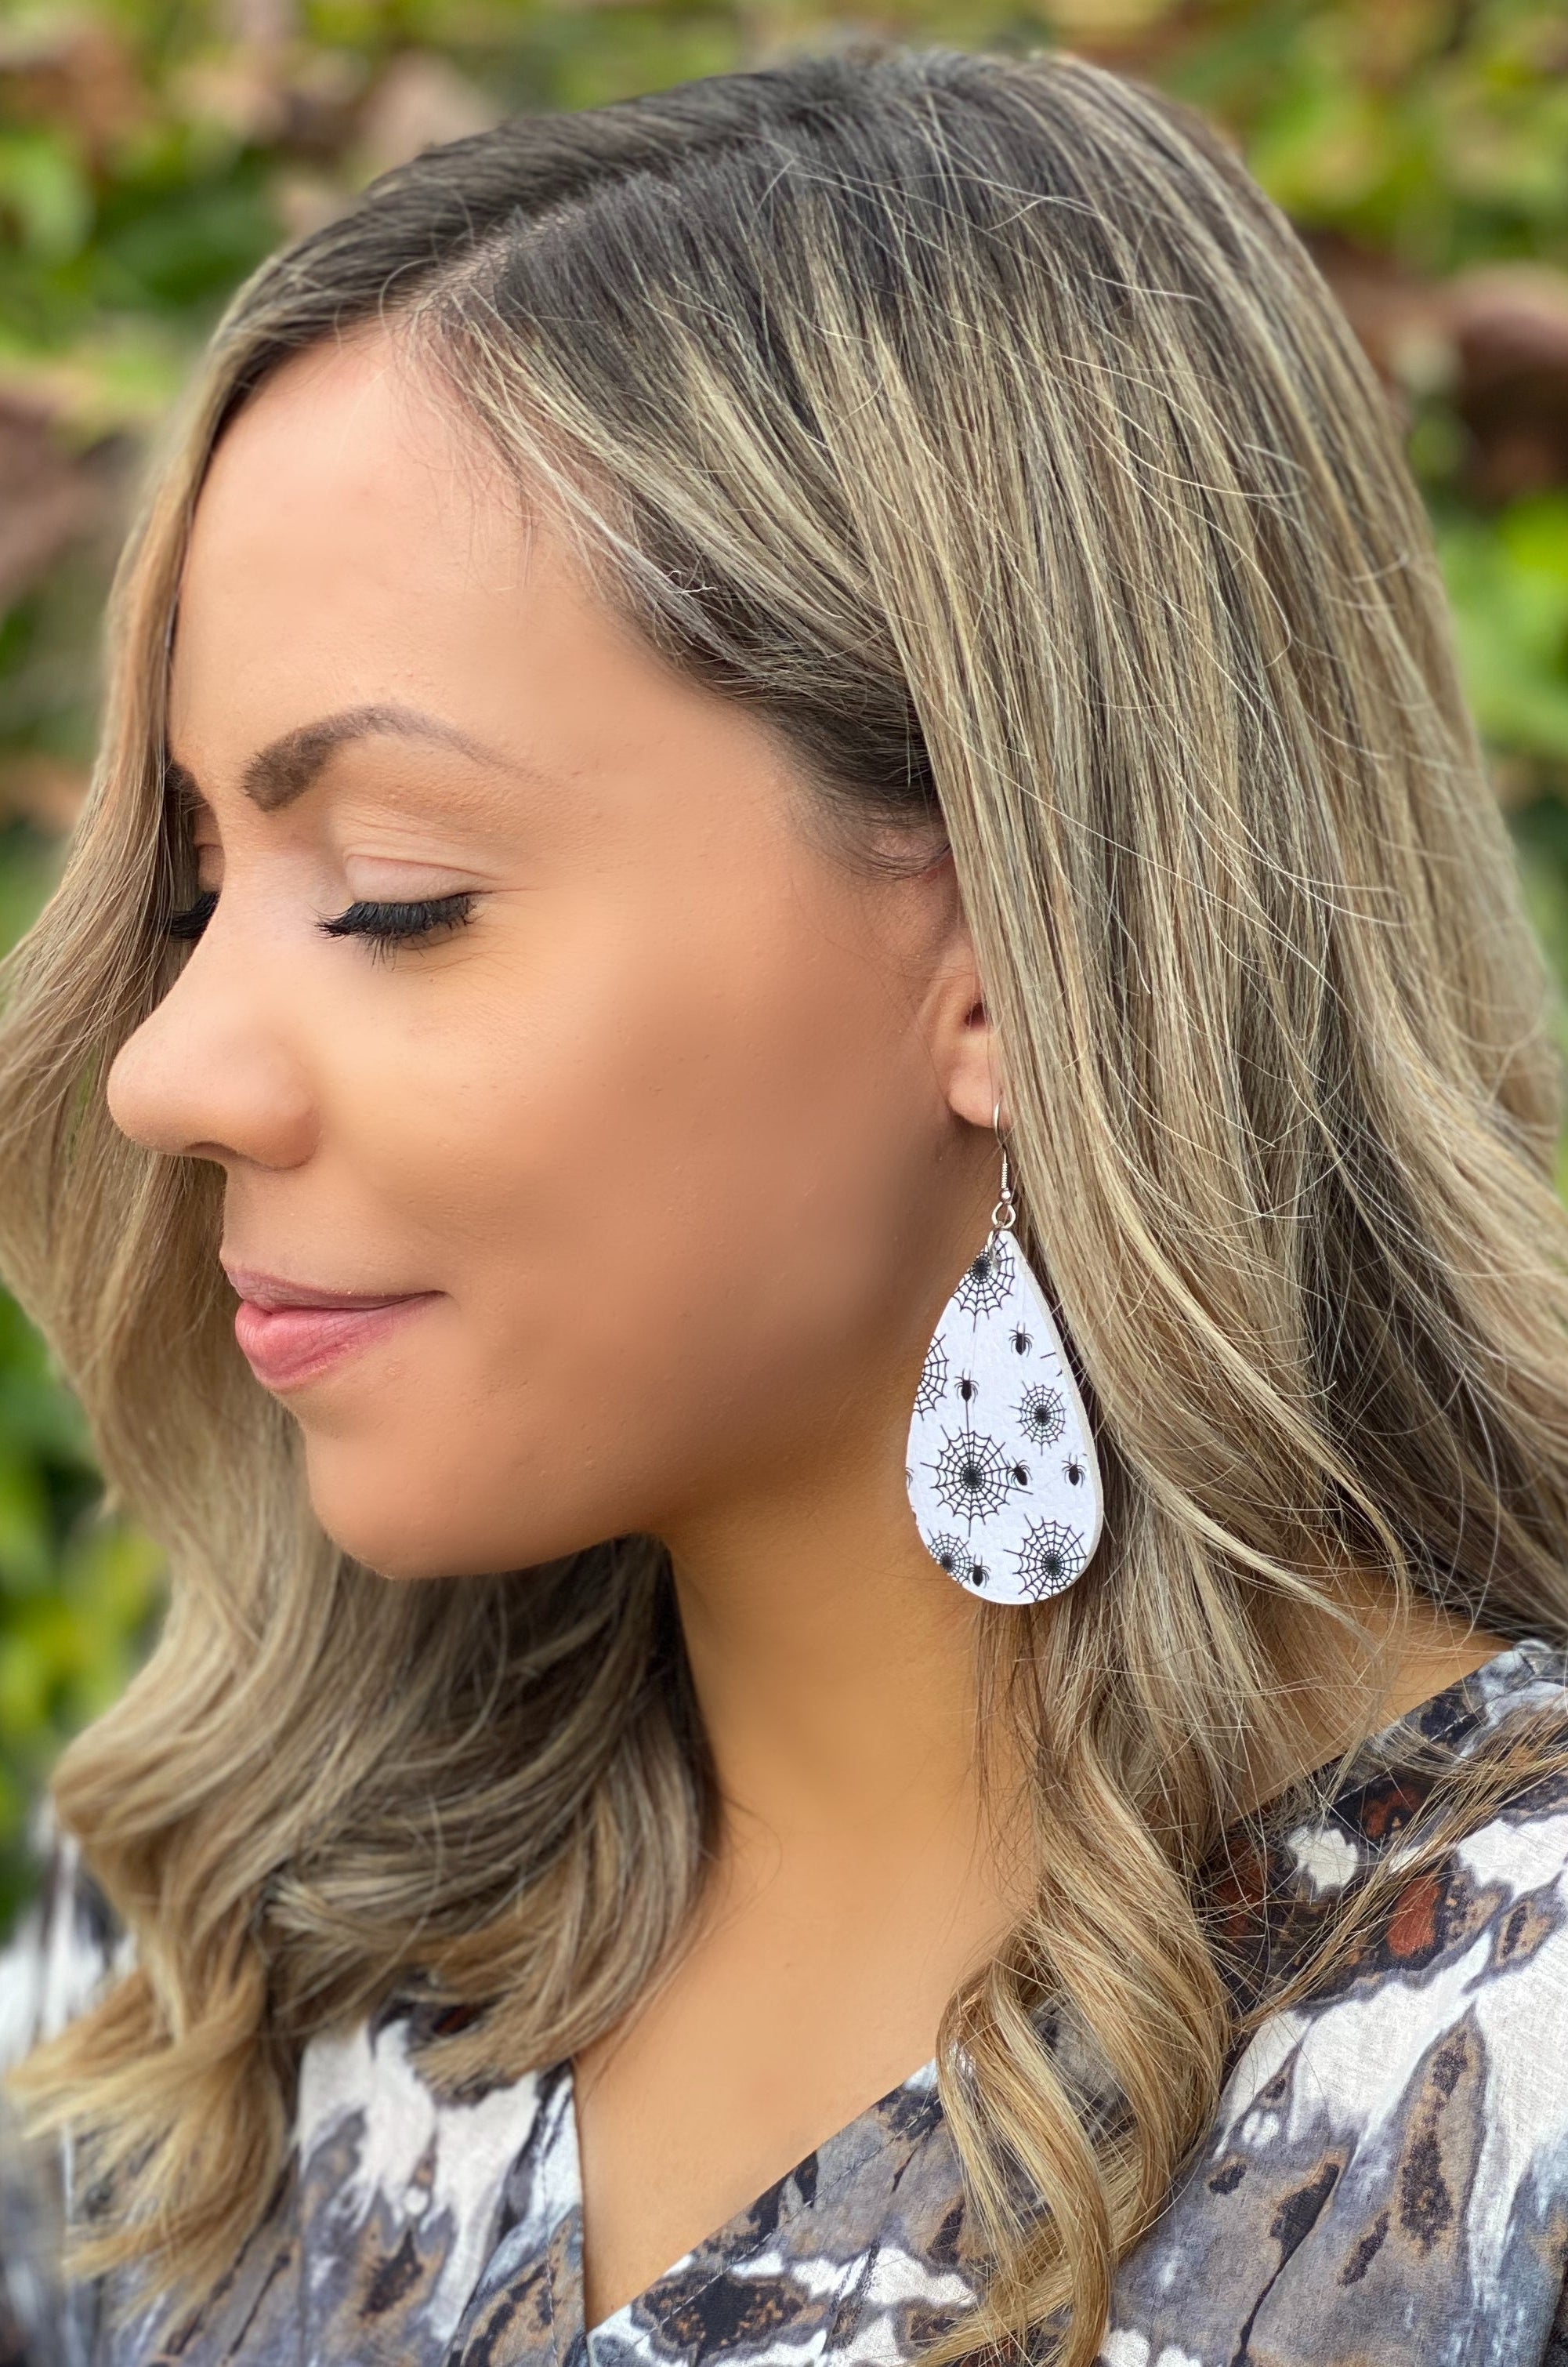 Caught In Your Web Teardrop Leather Earrings Accessories Boutique Simplified